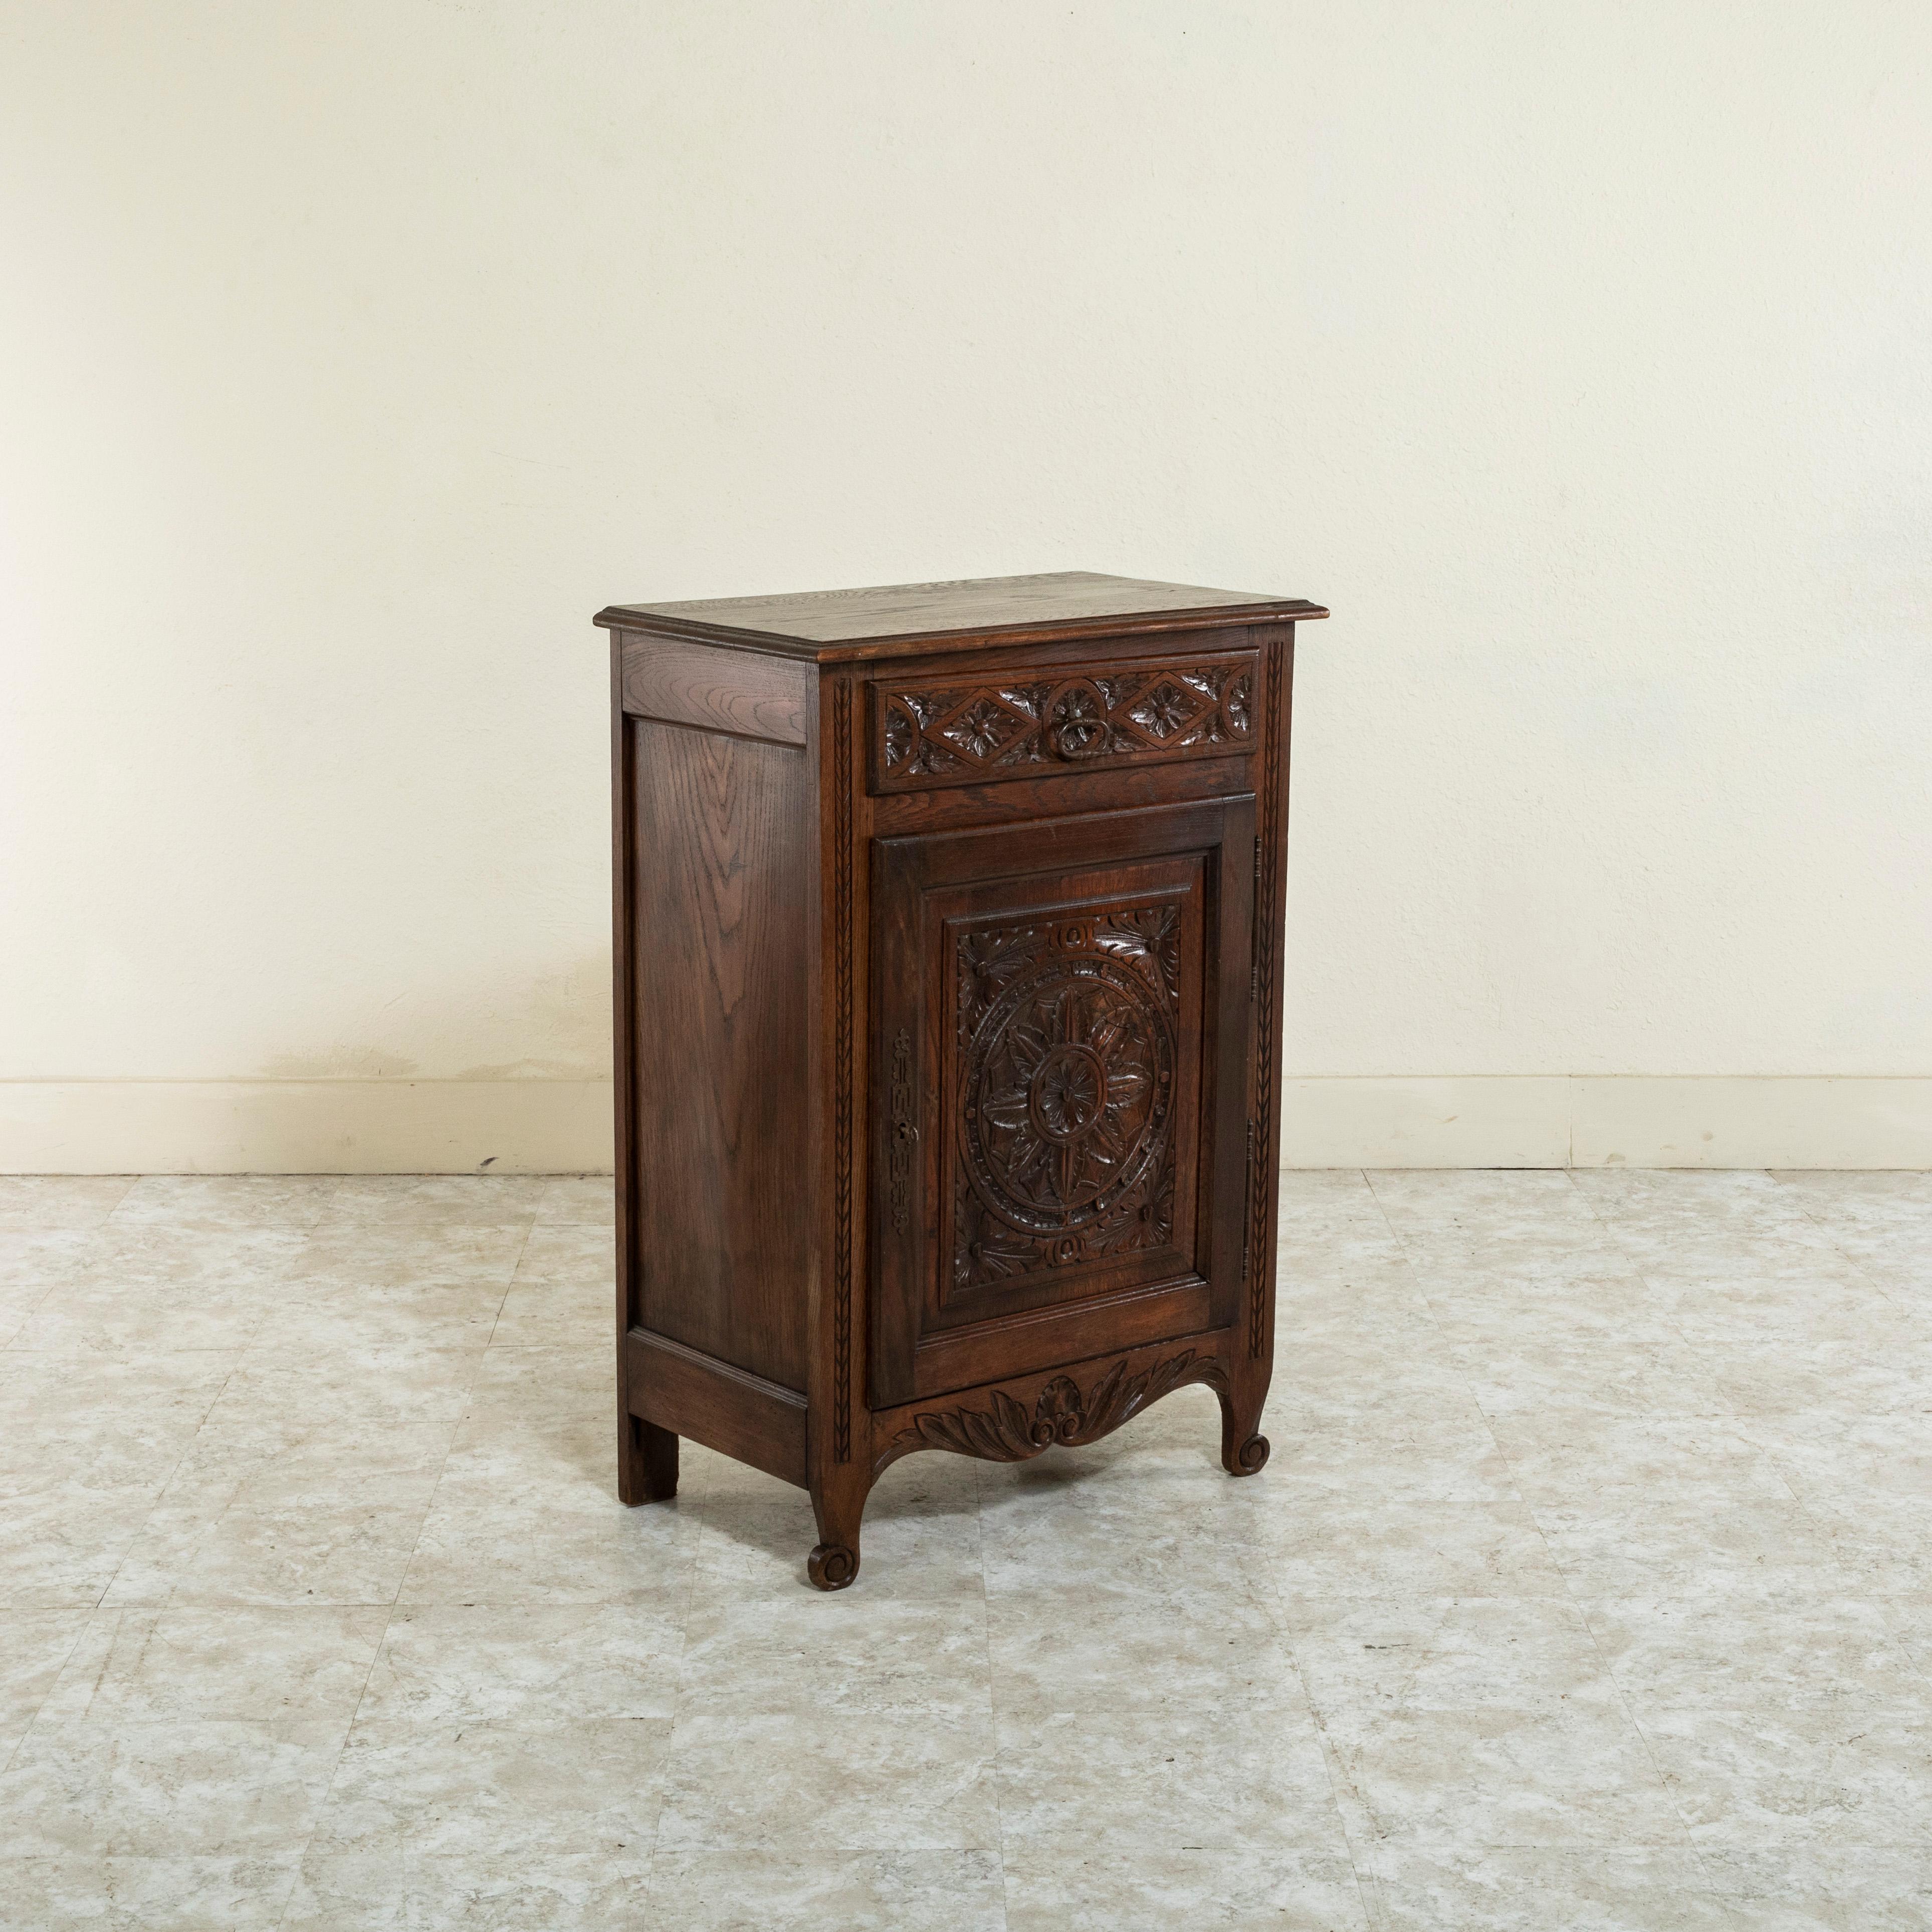 From the region of Brittany, France, this early twentieth century oak jam cabinet features hand carved regional details of rosettes and acanthus leaves on its facade. A single drawer below the beveled top opens with an iron drop ring drawer pull.